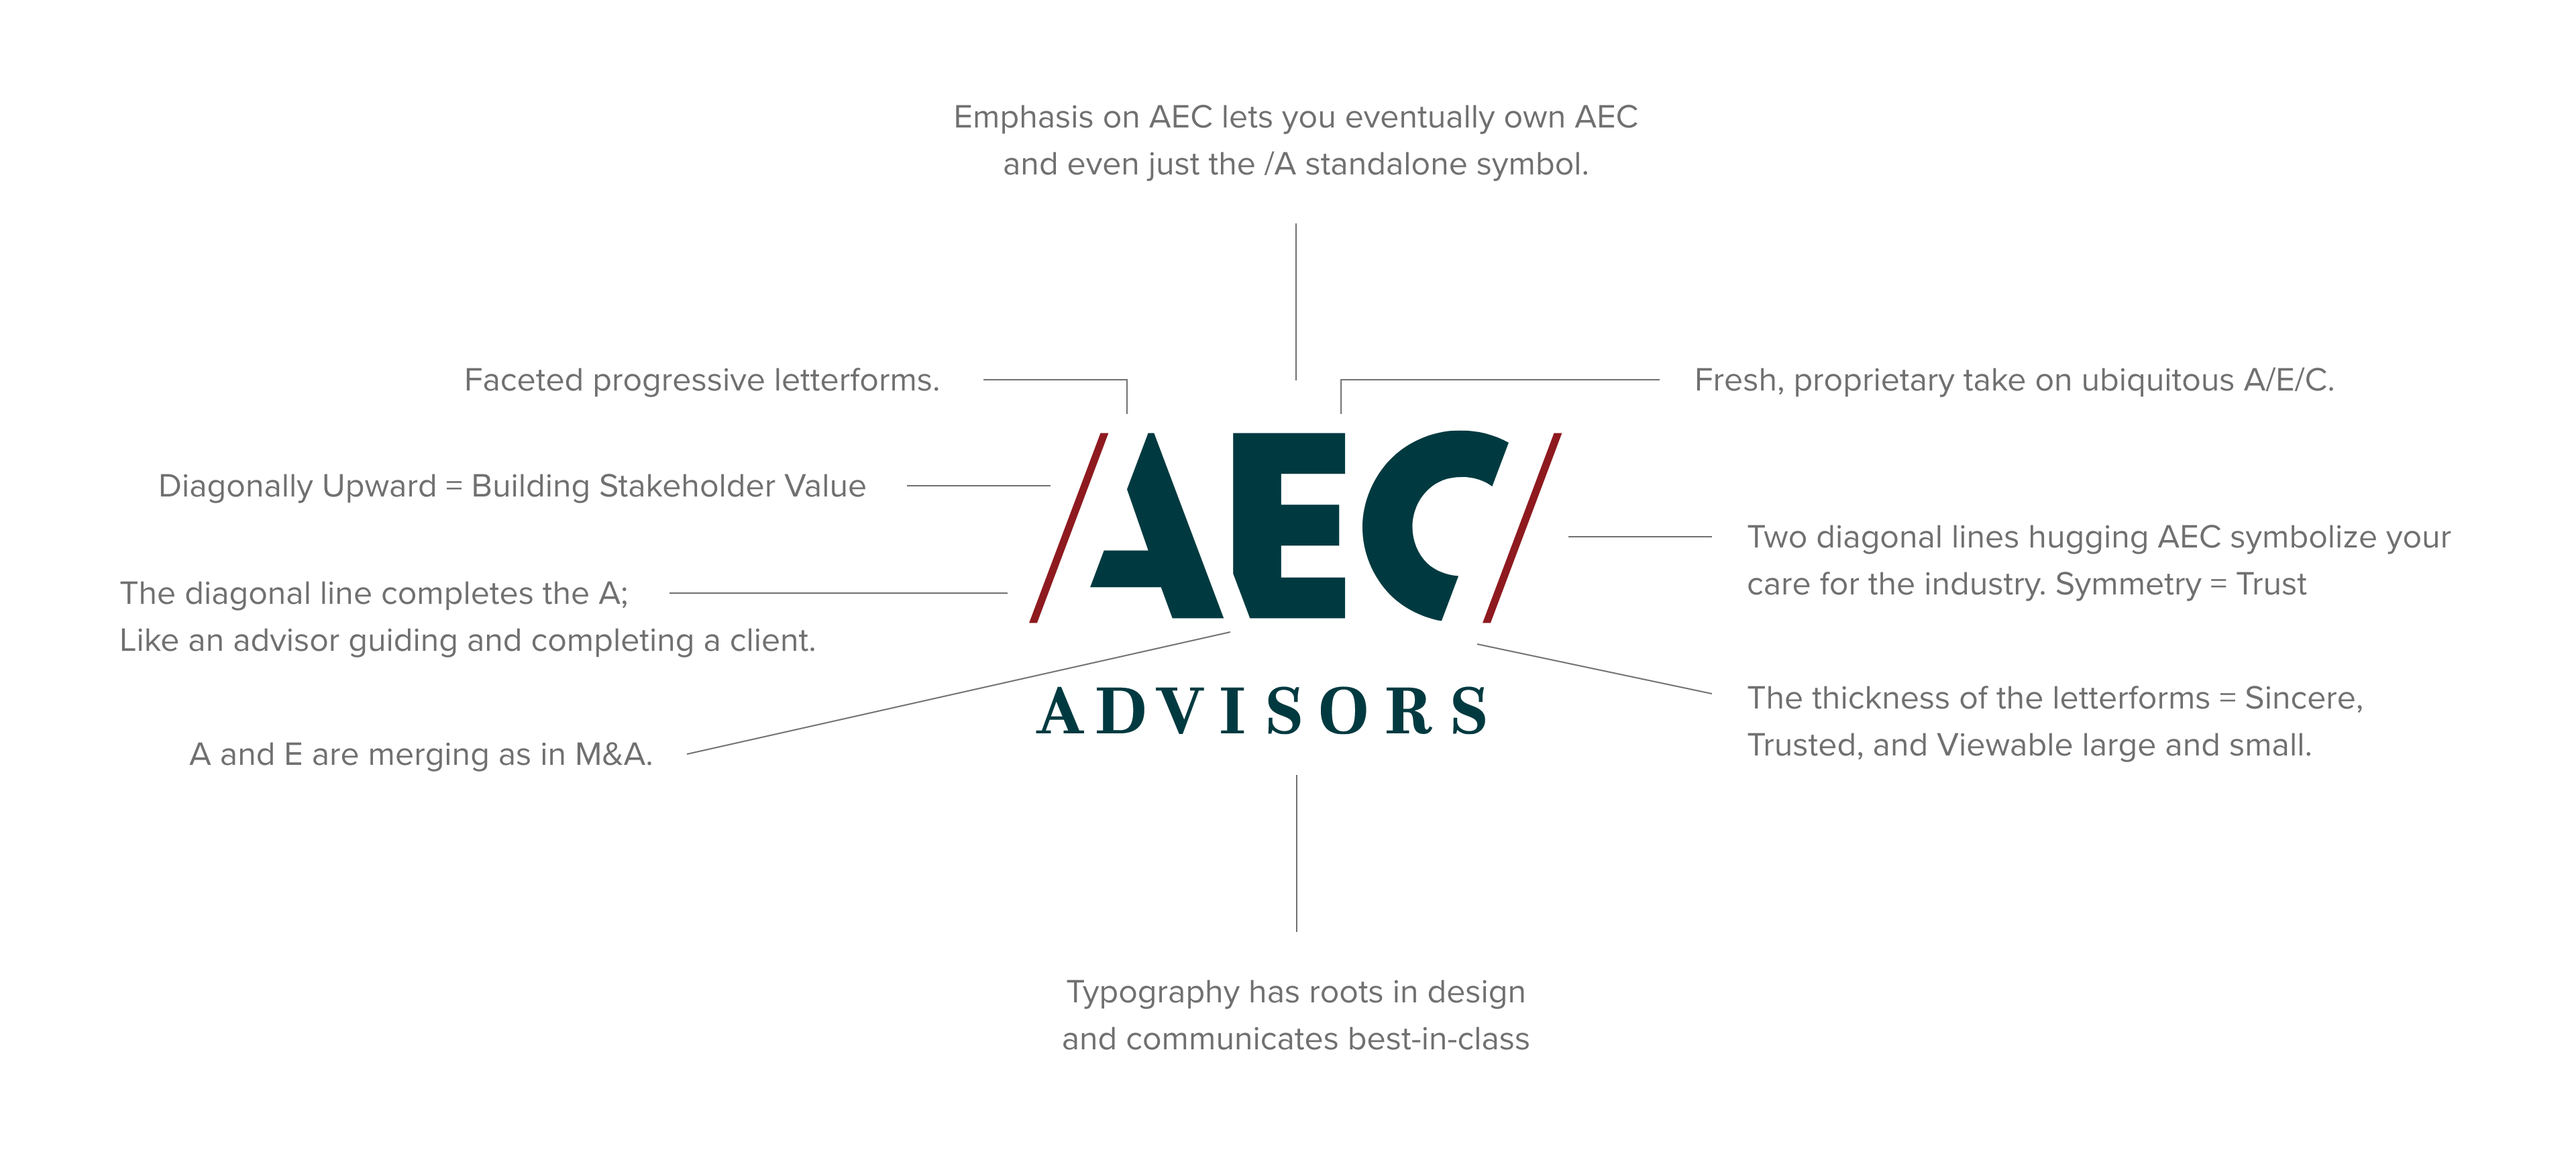 AEC Logo Meaning